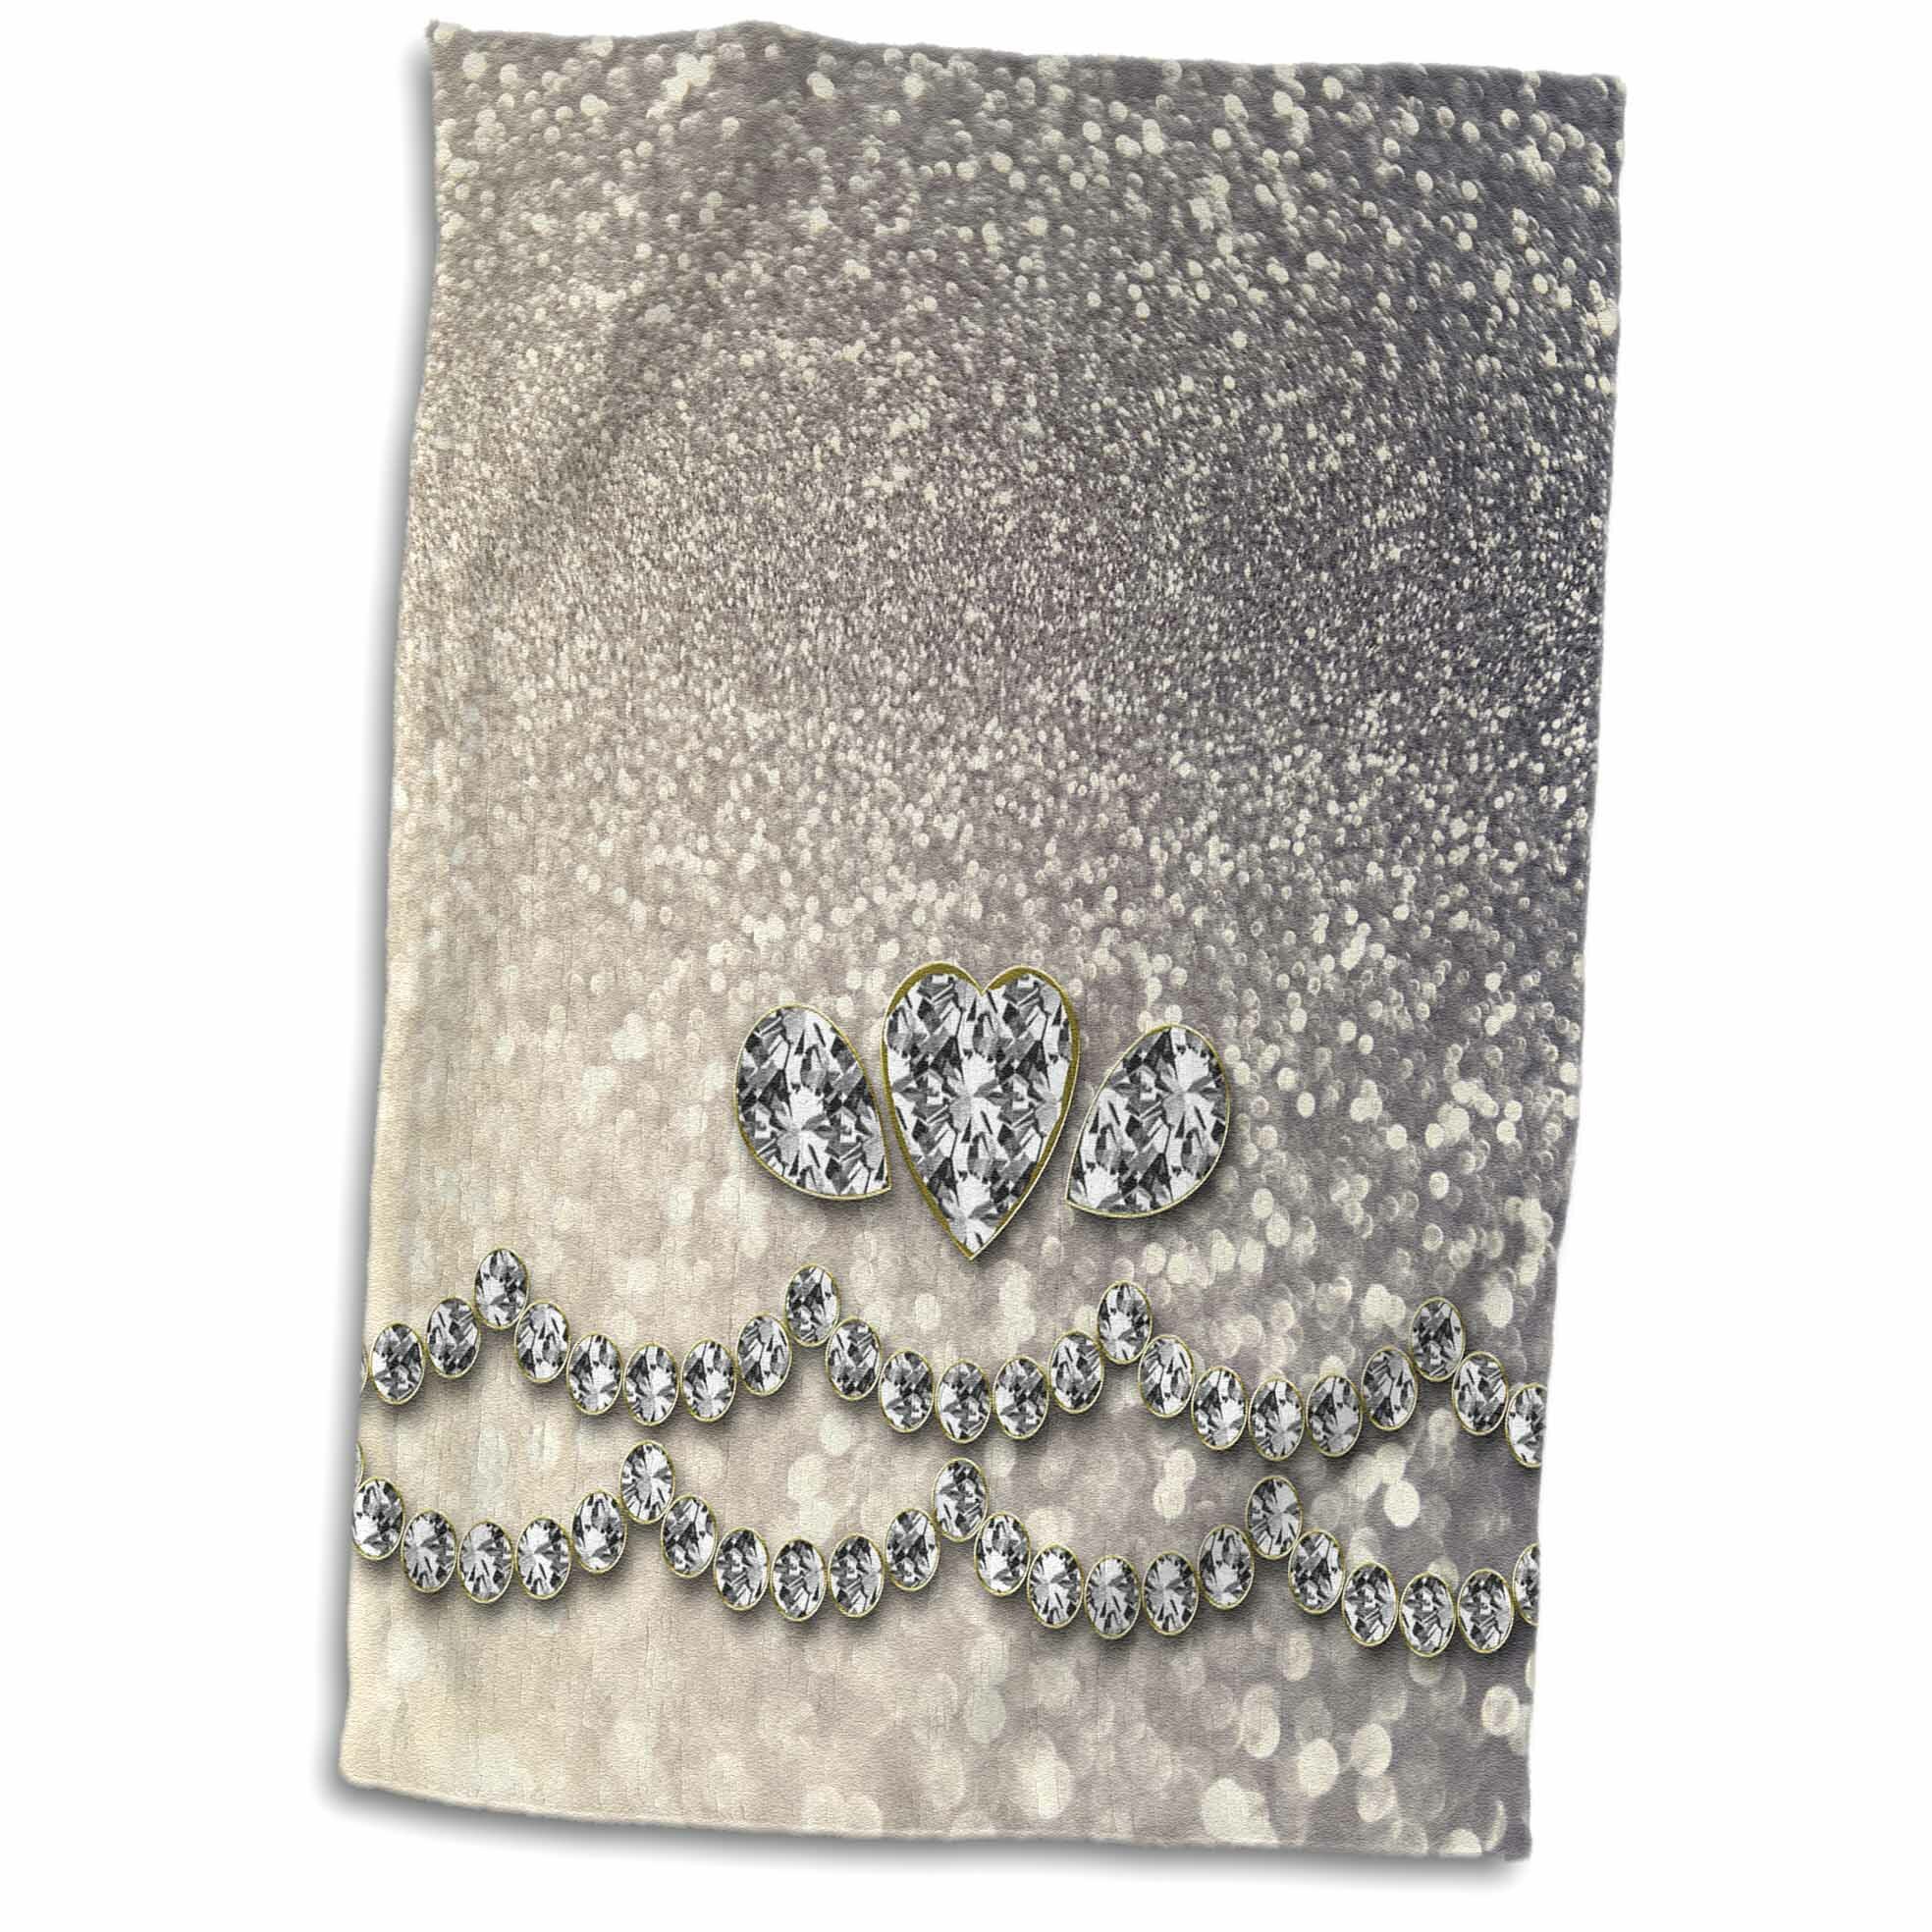 Faux Gold Glitter All Over Hand Towel